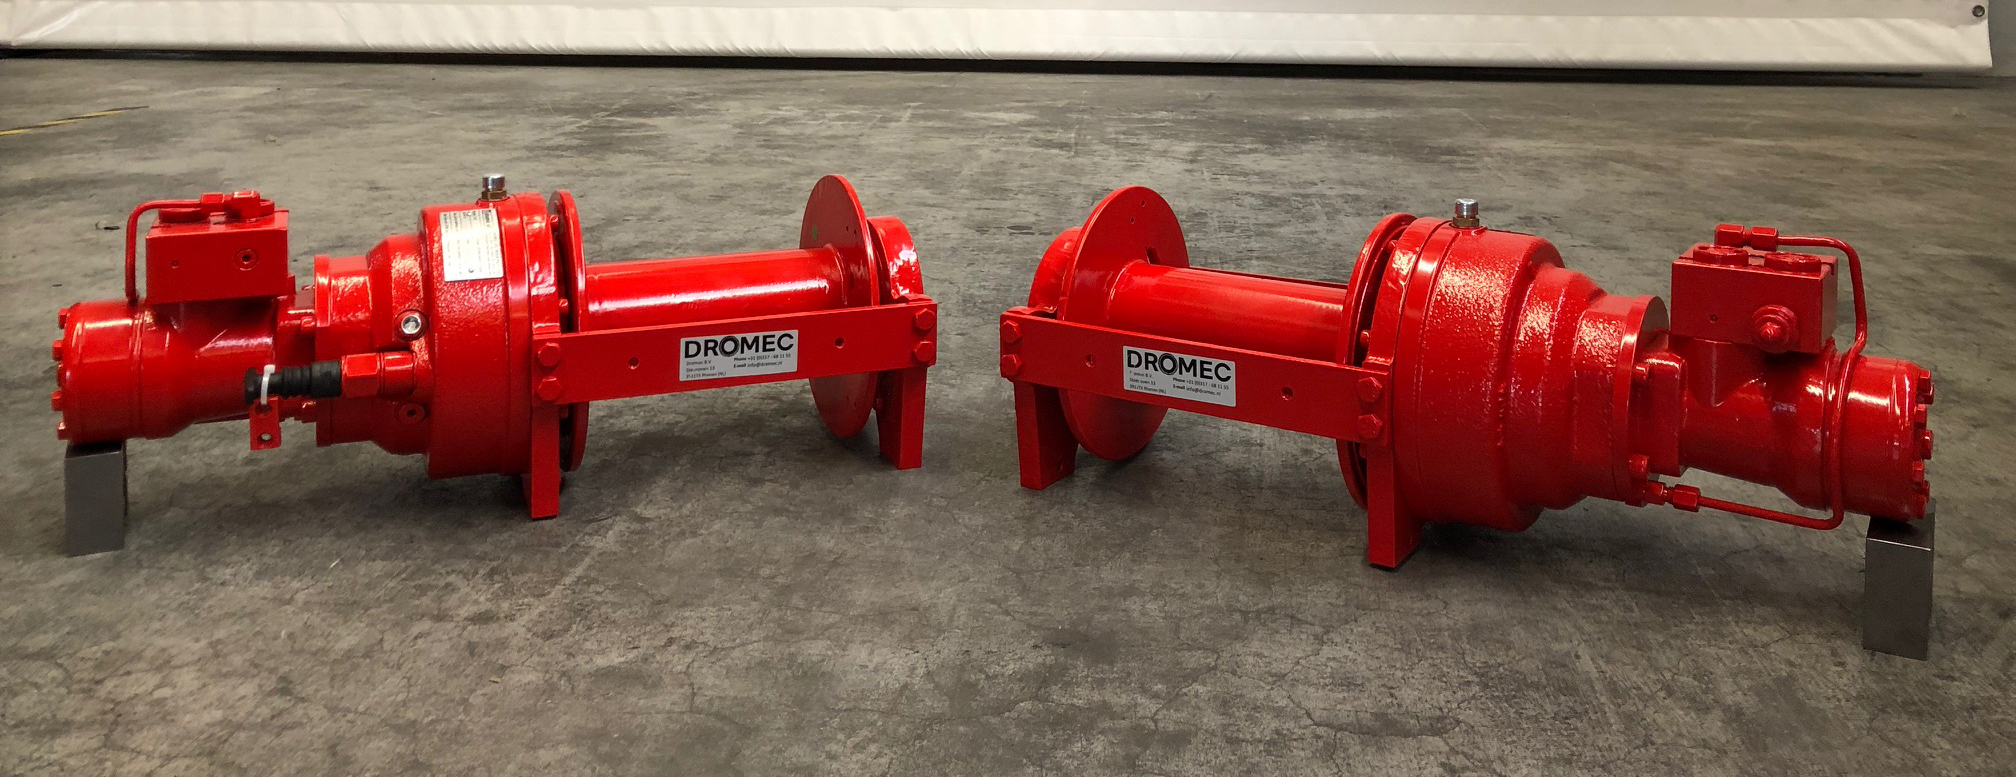 Dinamic Oil T27 Recovery winches